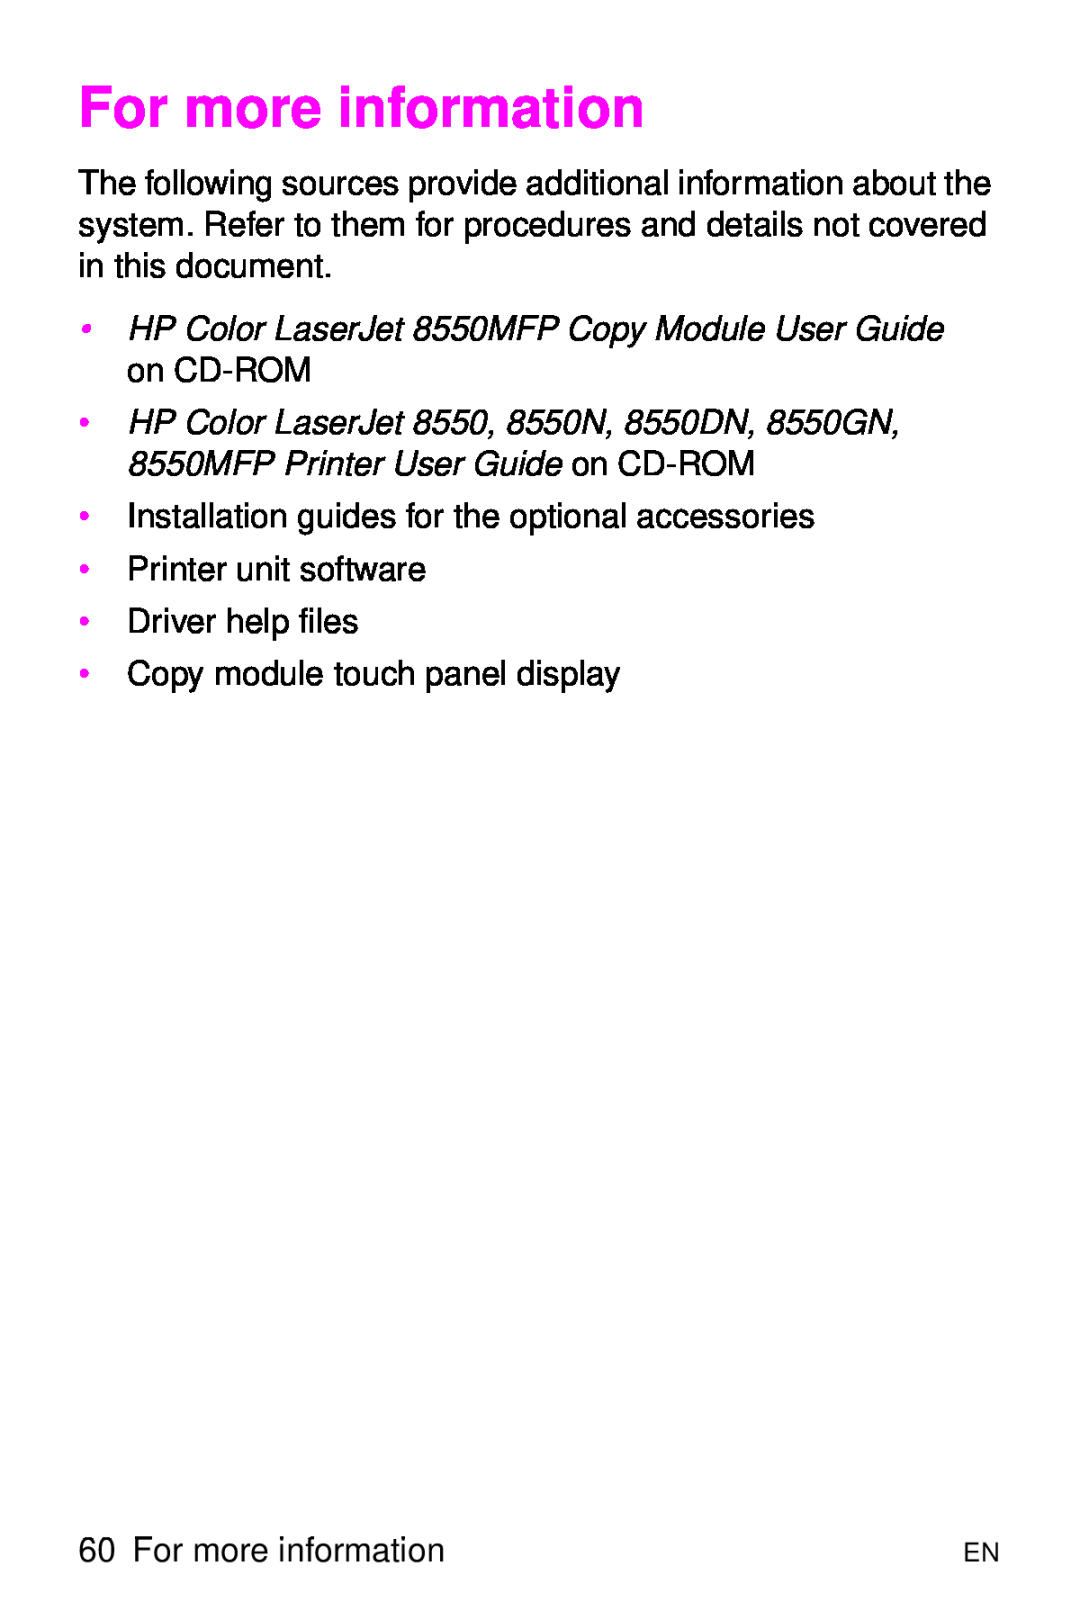 HP 8000 s manual For more information, HP Color LaserJet 8550MFP Copy Module User Guide on CD-ROM 